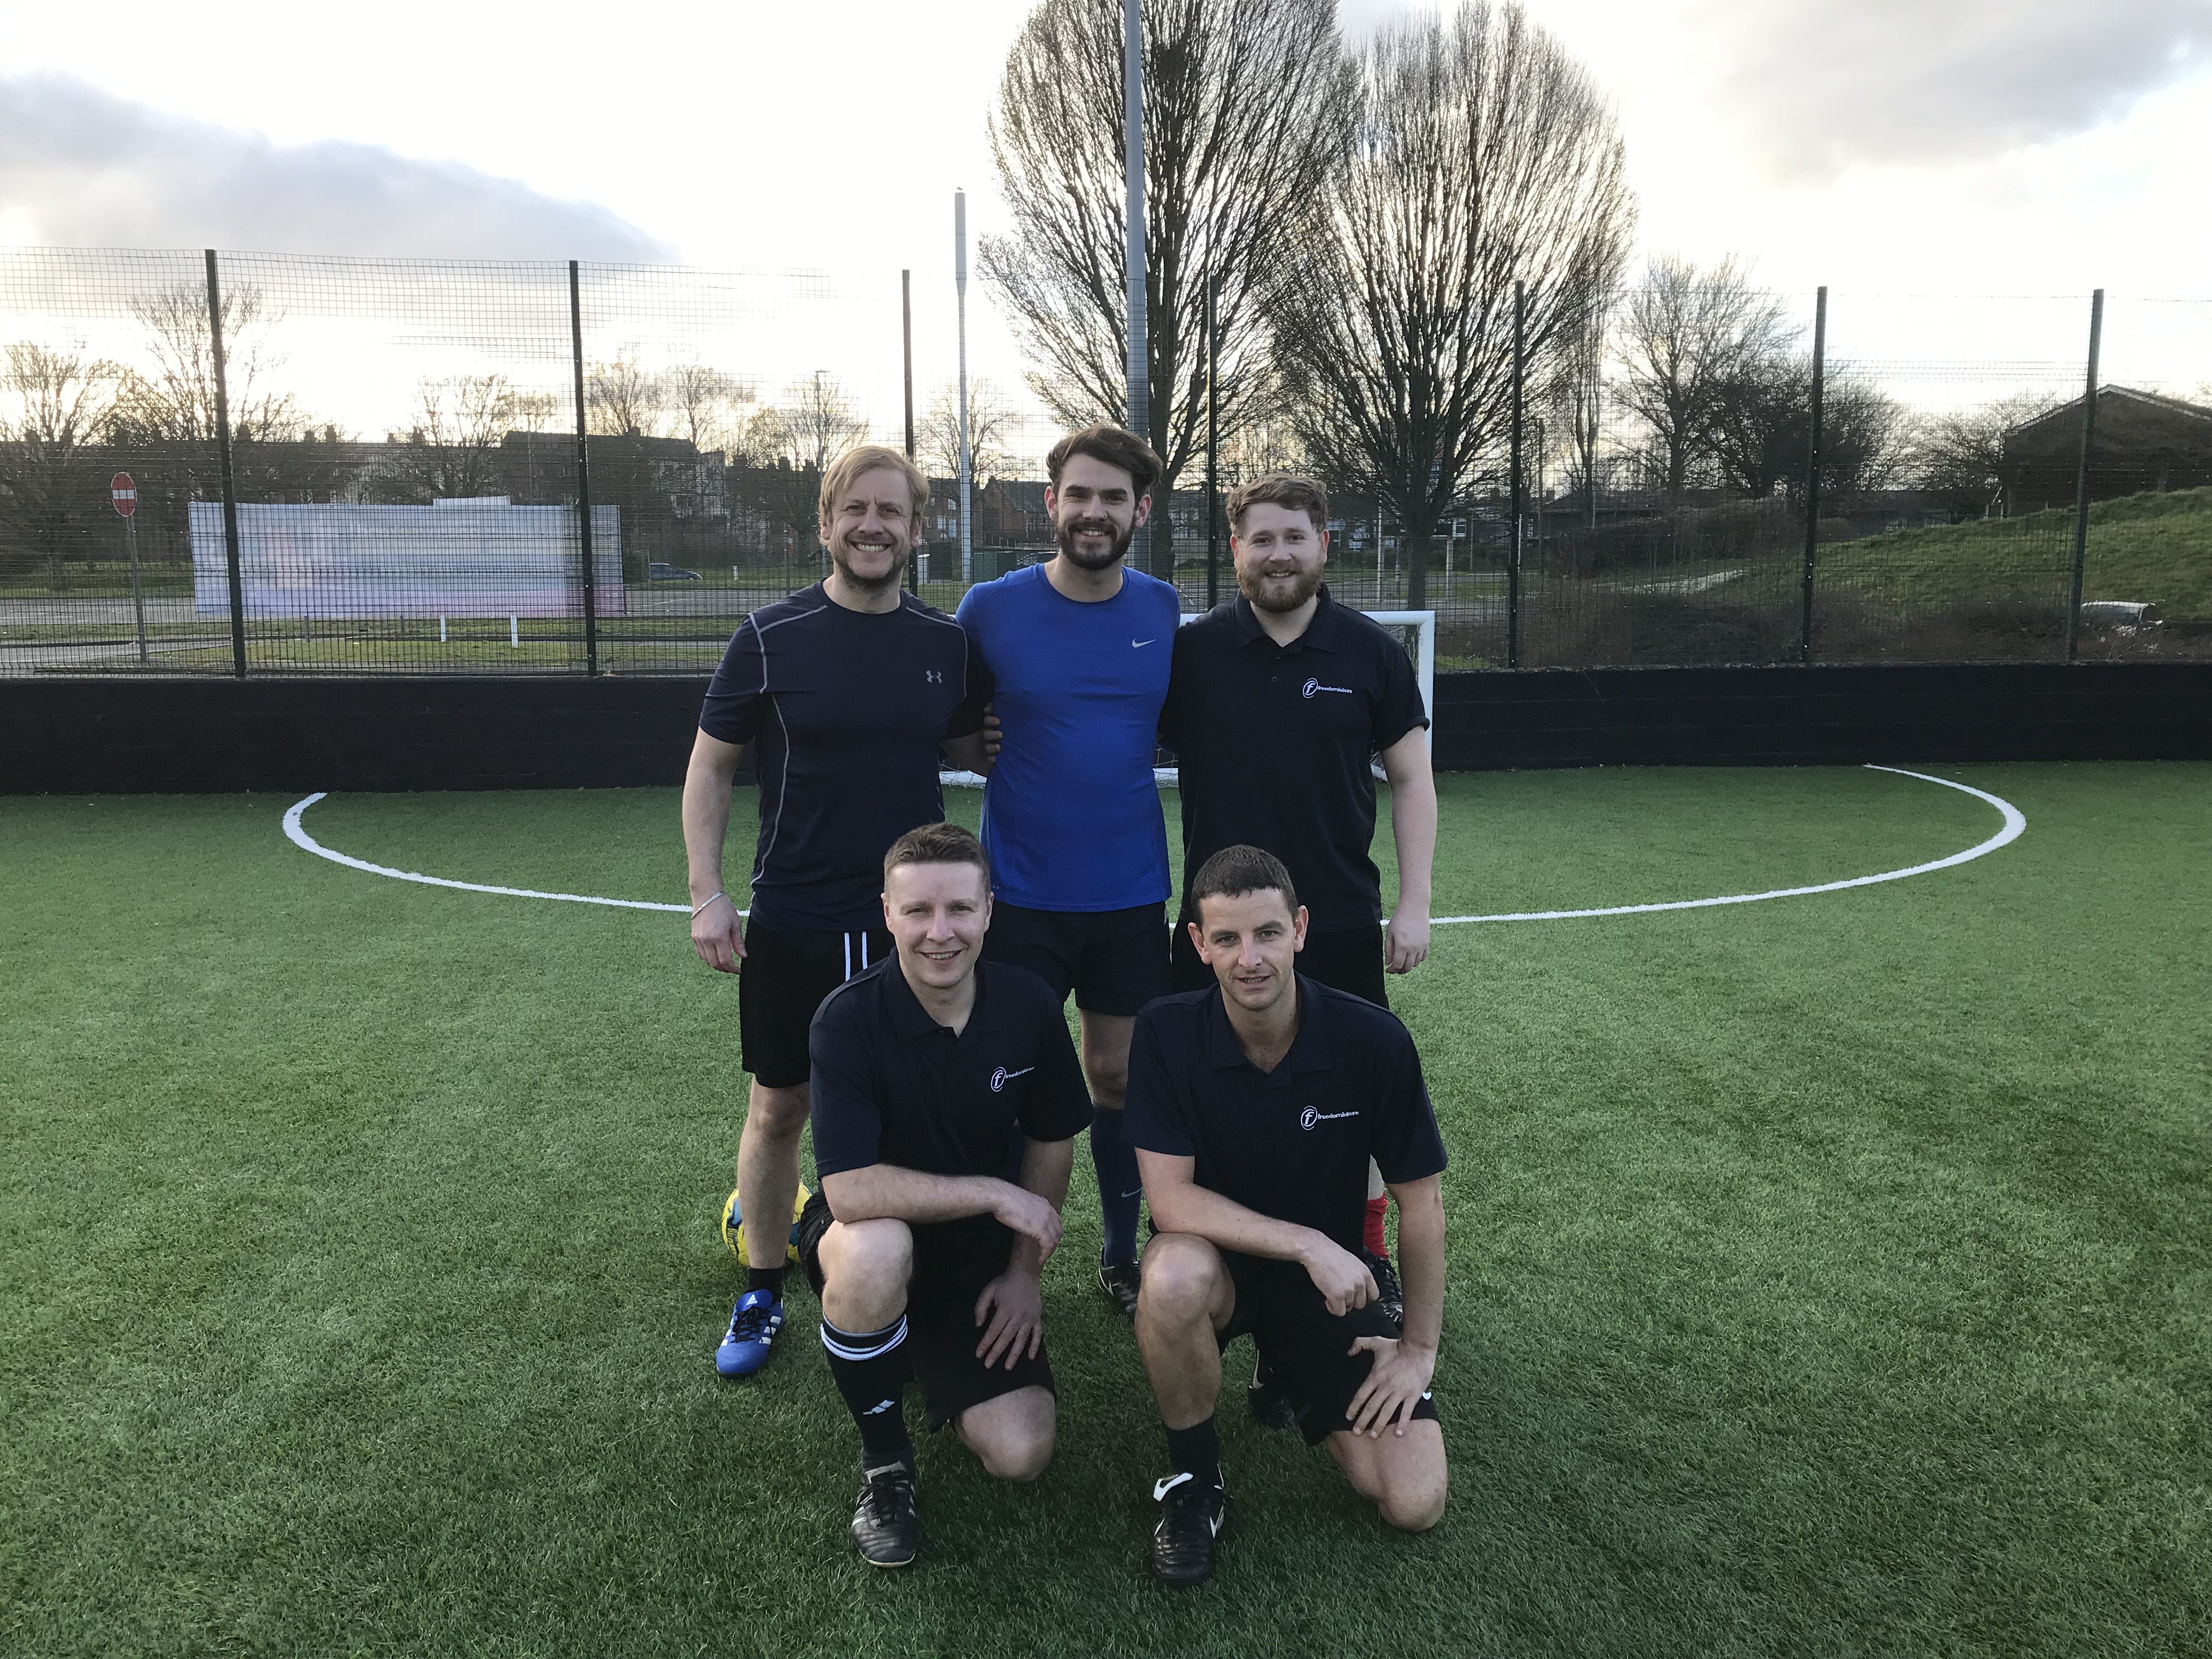 Council team takes on leisure staff in football friendly!